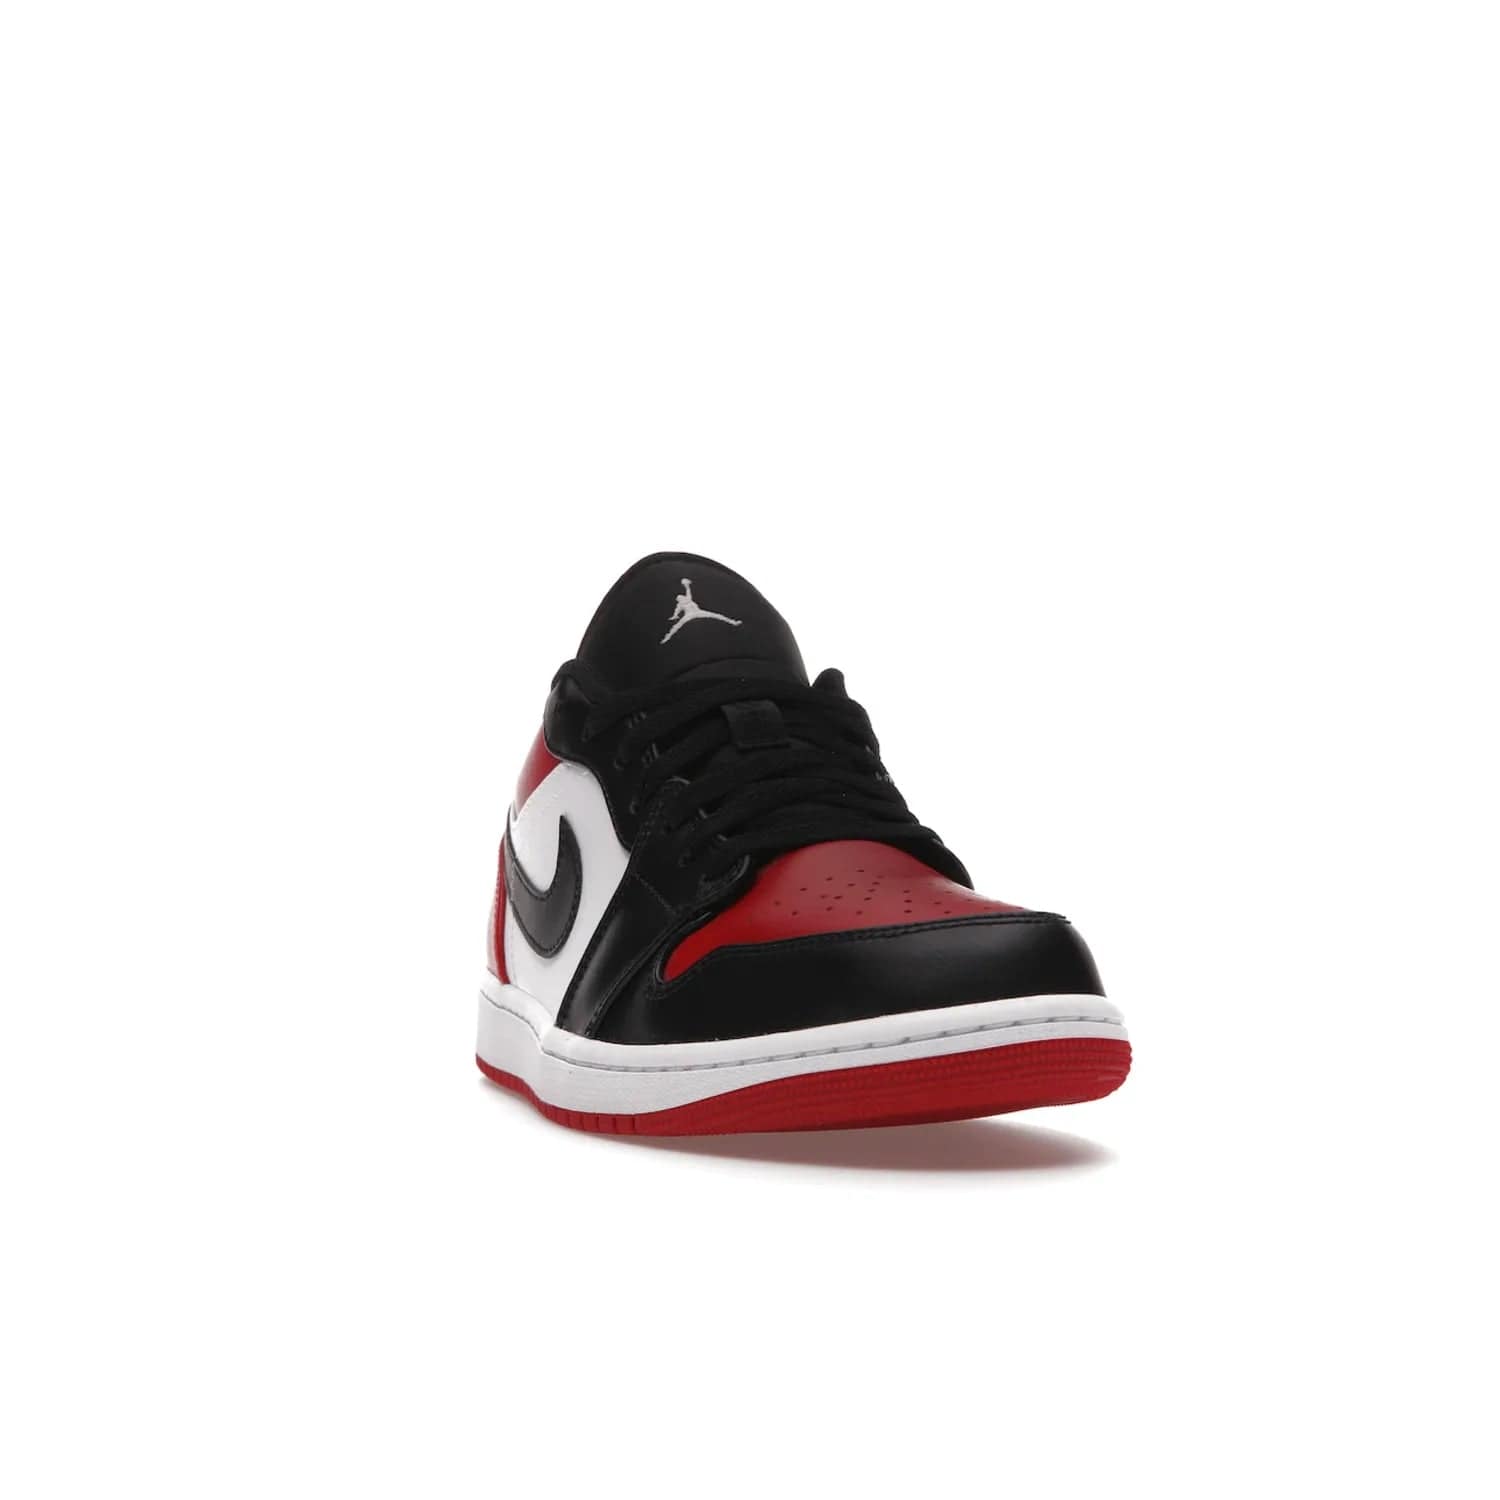 Jordan 1 Low Bred Toe - Image 8 - Only at www.BallersClubKickz.com - Step into the iconic Jordan 1 Retro. Mixing and matching of leather in red, black, and white makes for a unique colorway. Finished off with a Wing logo embroidery & Jumpman label. Comfortable and stylish at an affordable $100, the Jordan 1 Low Bred Toe is perfect for any true sneaker fan.